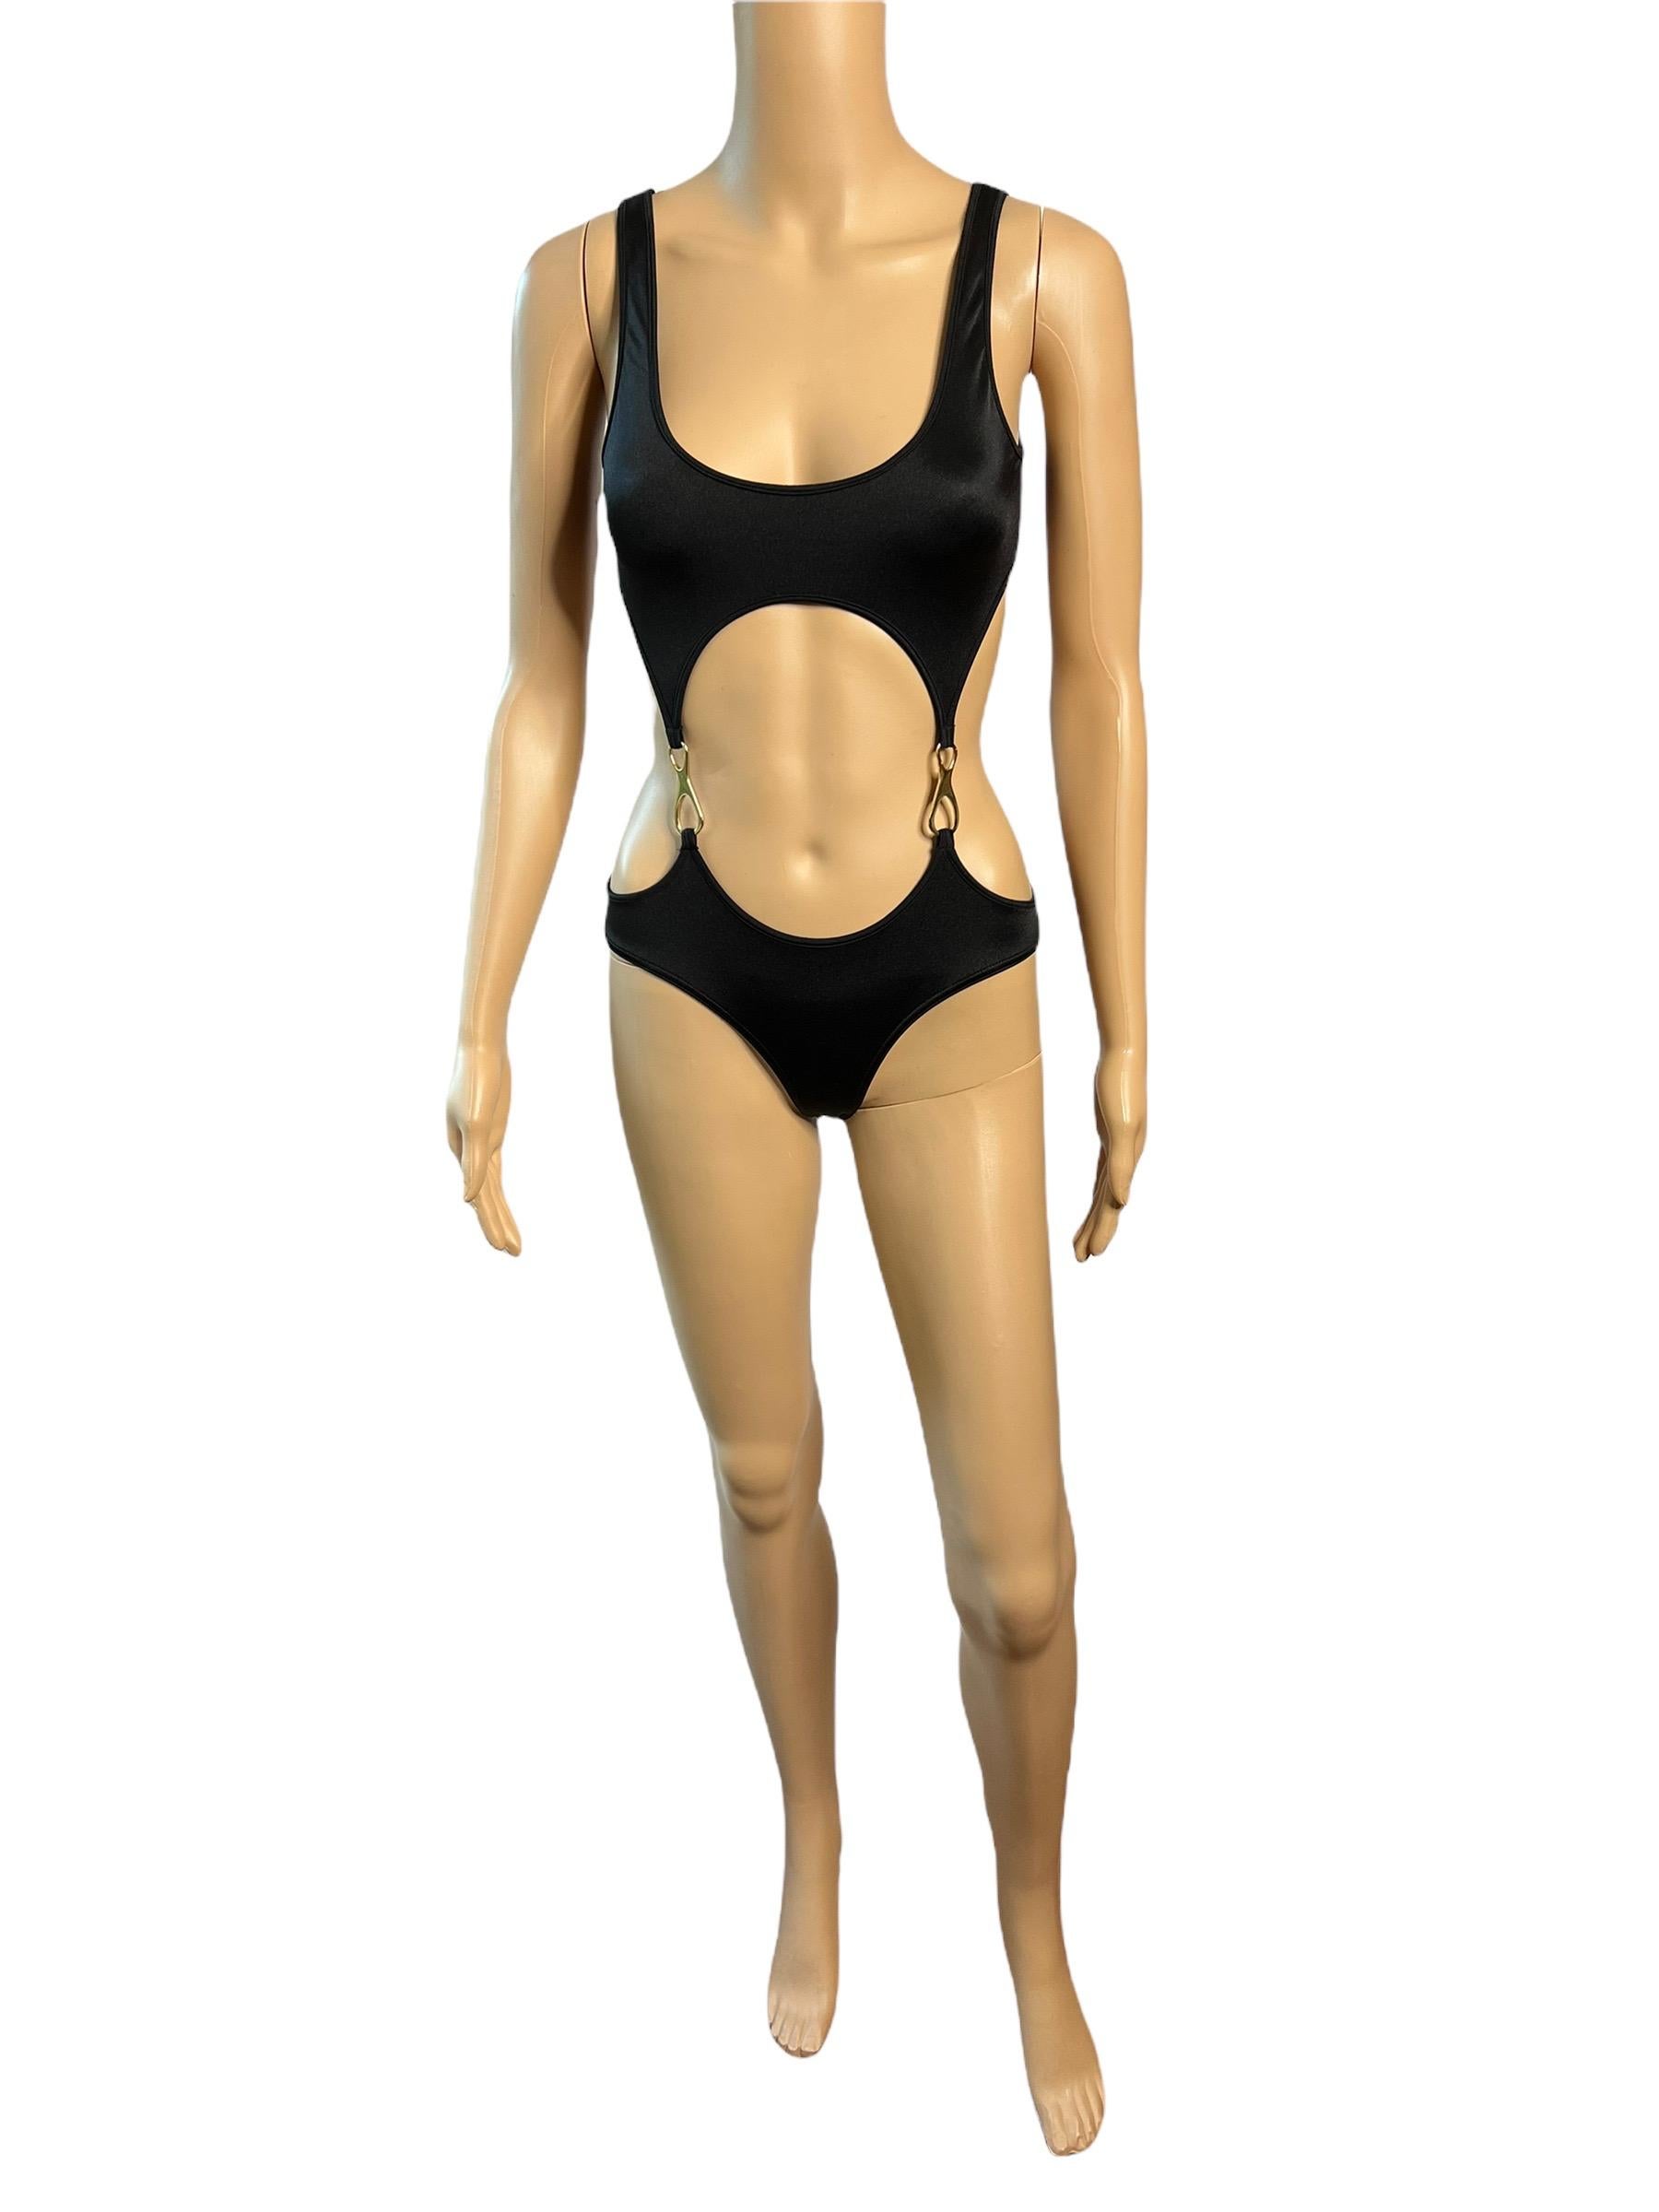 Tom Ford for Gucci S/S 1998 Cutout Gold Buckles One Piece Bodysuit Swimsuit Swimwear Size M


